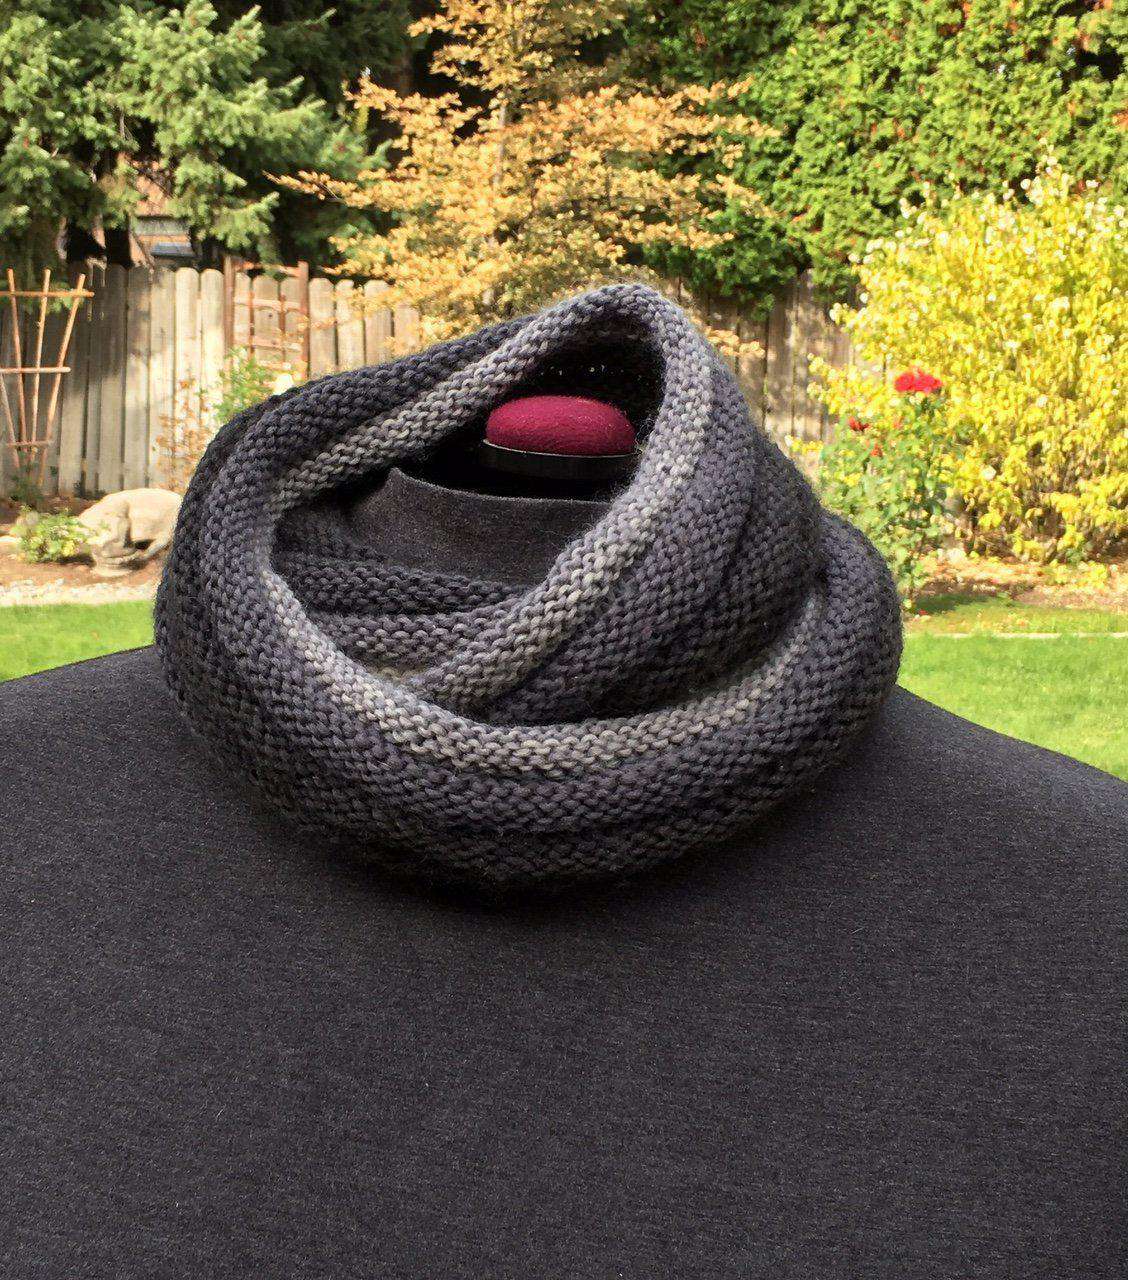 Welted Infinity Cowl by Kathleen Cubley